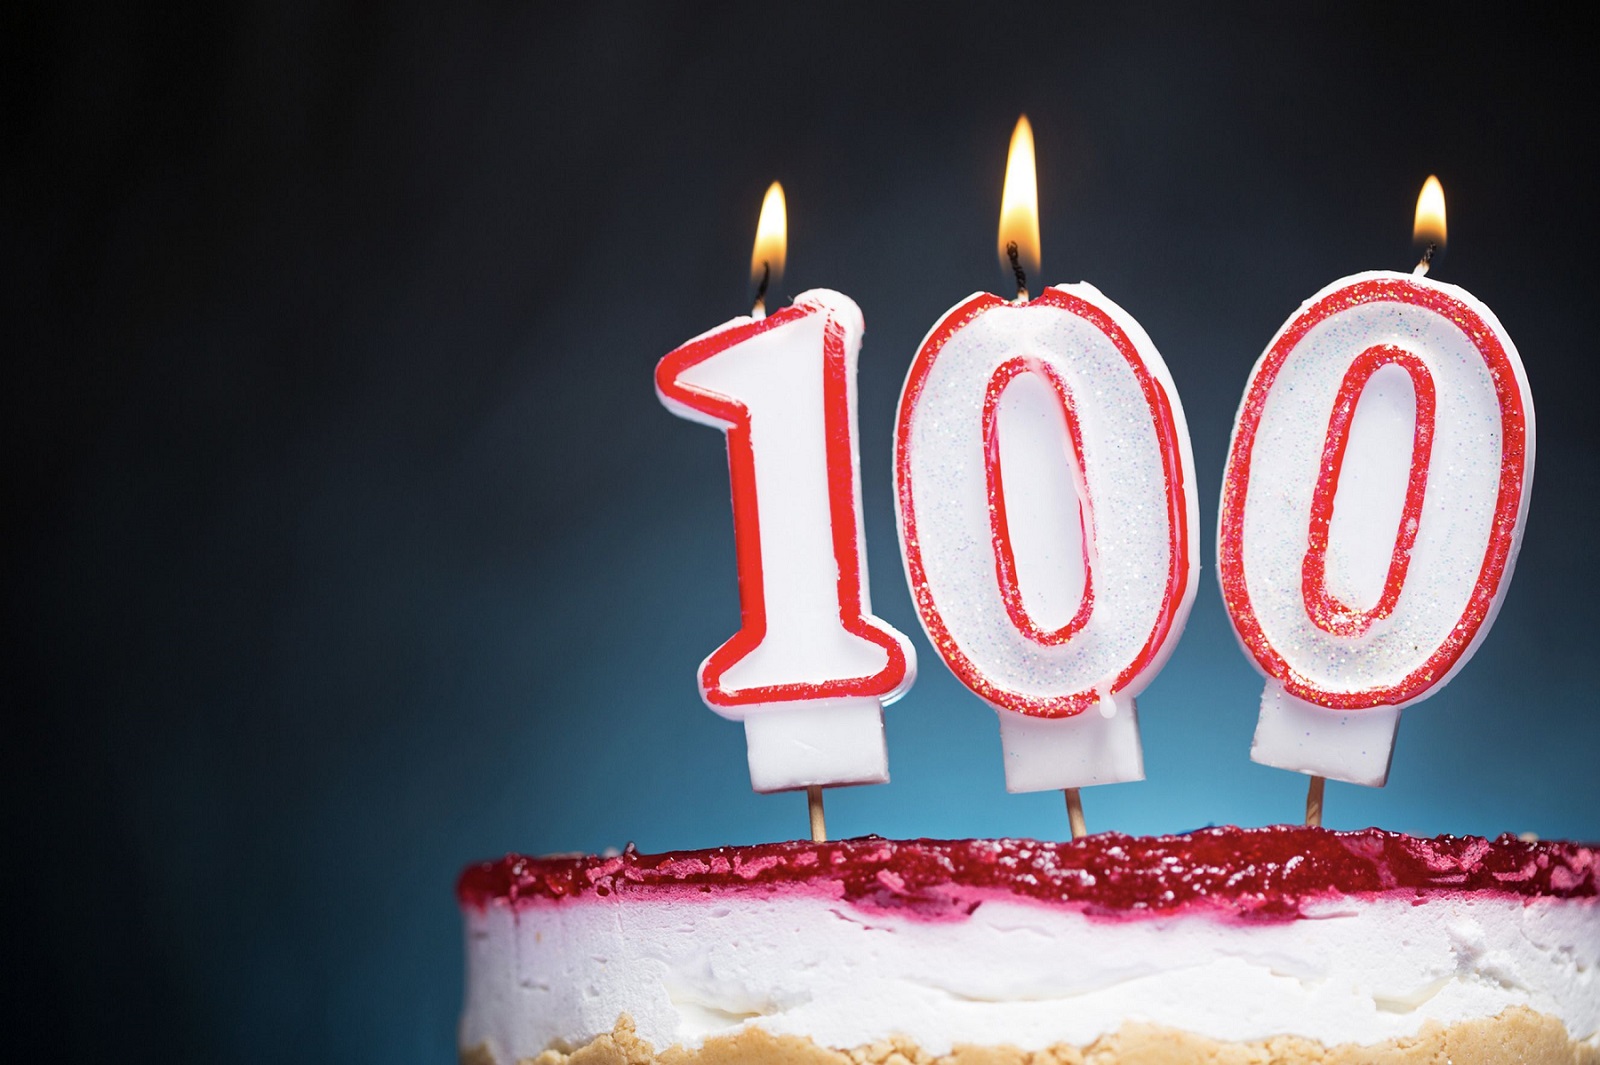 100 years: is it a new life expectancy for people born in the XXI century?